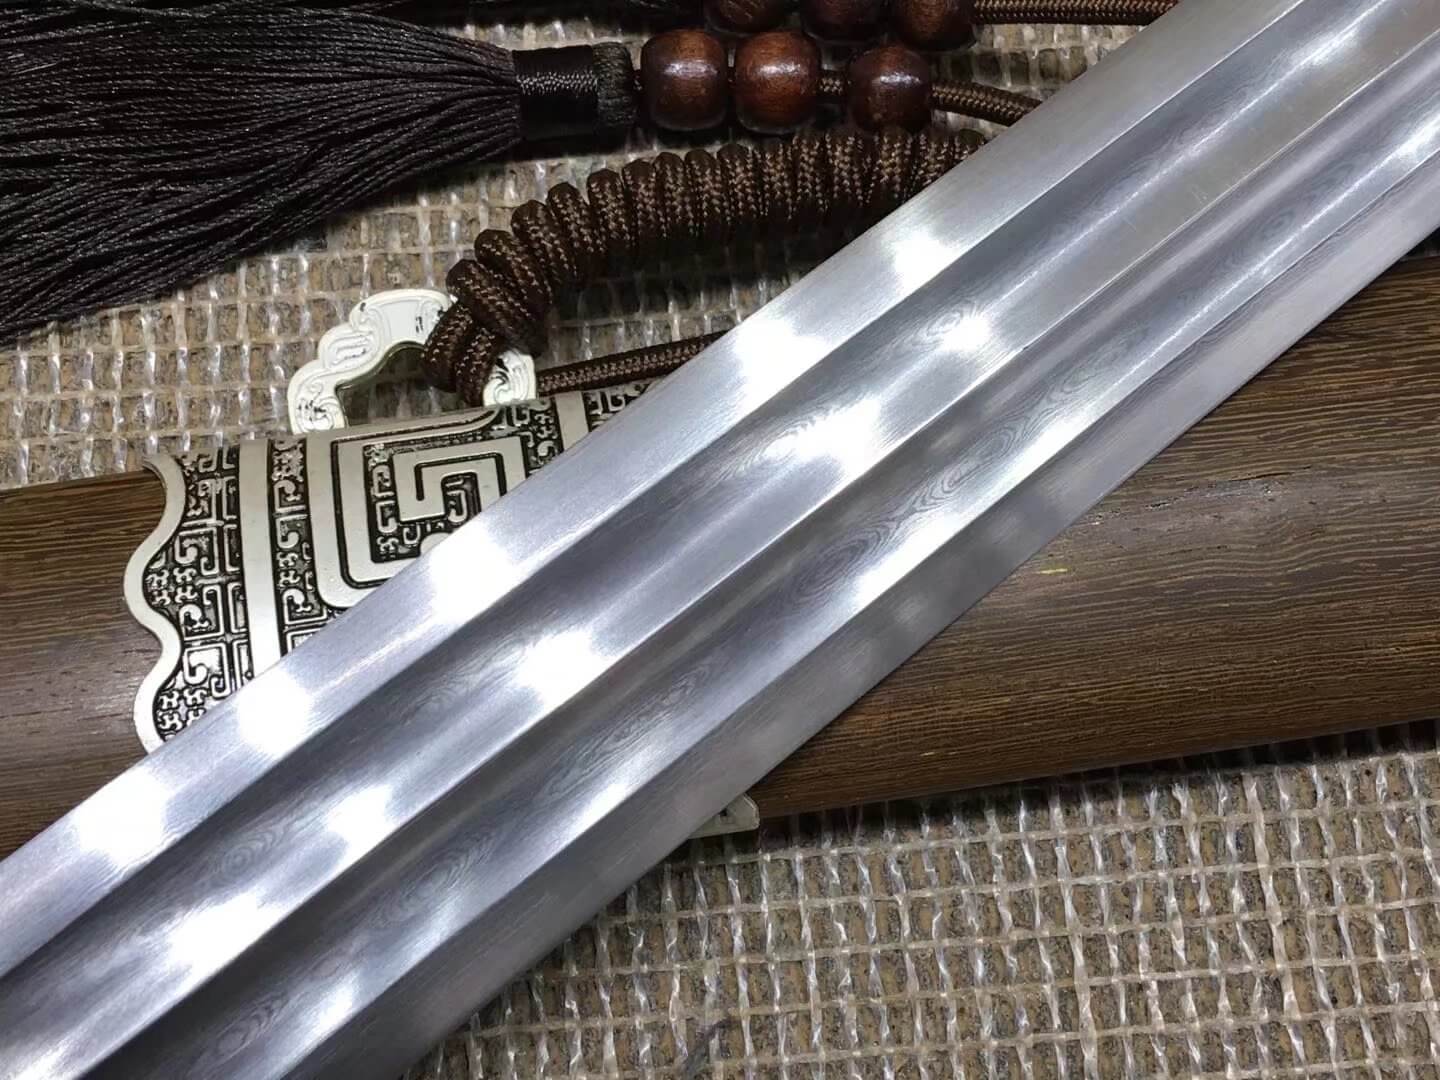 Yuewang sword(Folded steel blade,Rosewood scabbard,Alloy fitted)Length 32" - Chinese sword shop